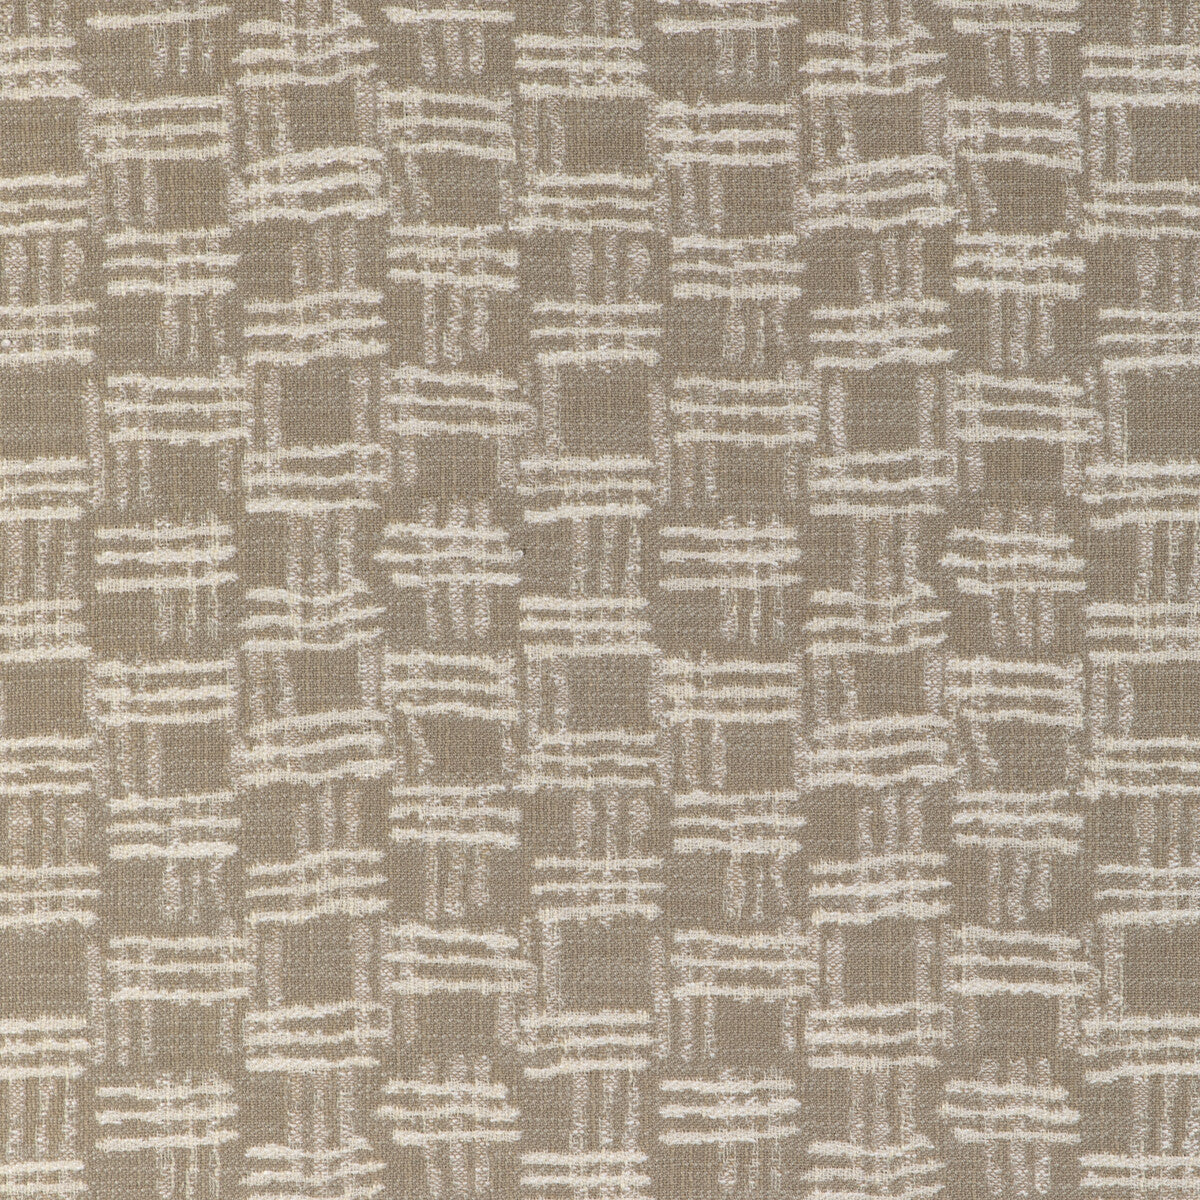 Cross Waves fabric in sand color - pattern 36928.16.0 - by Kravet Couture in the Riviera collection